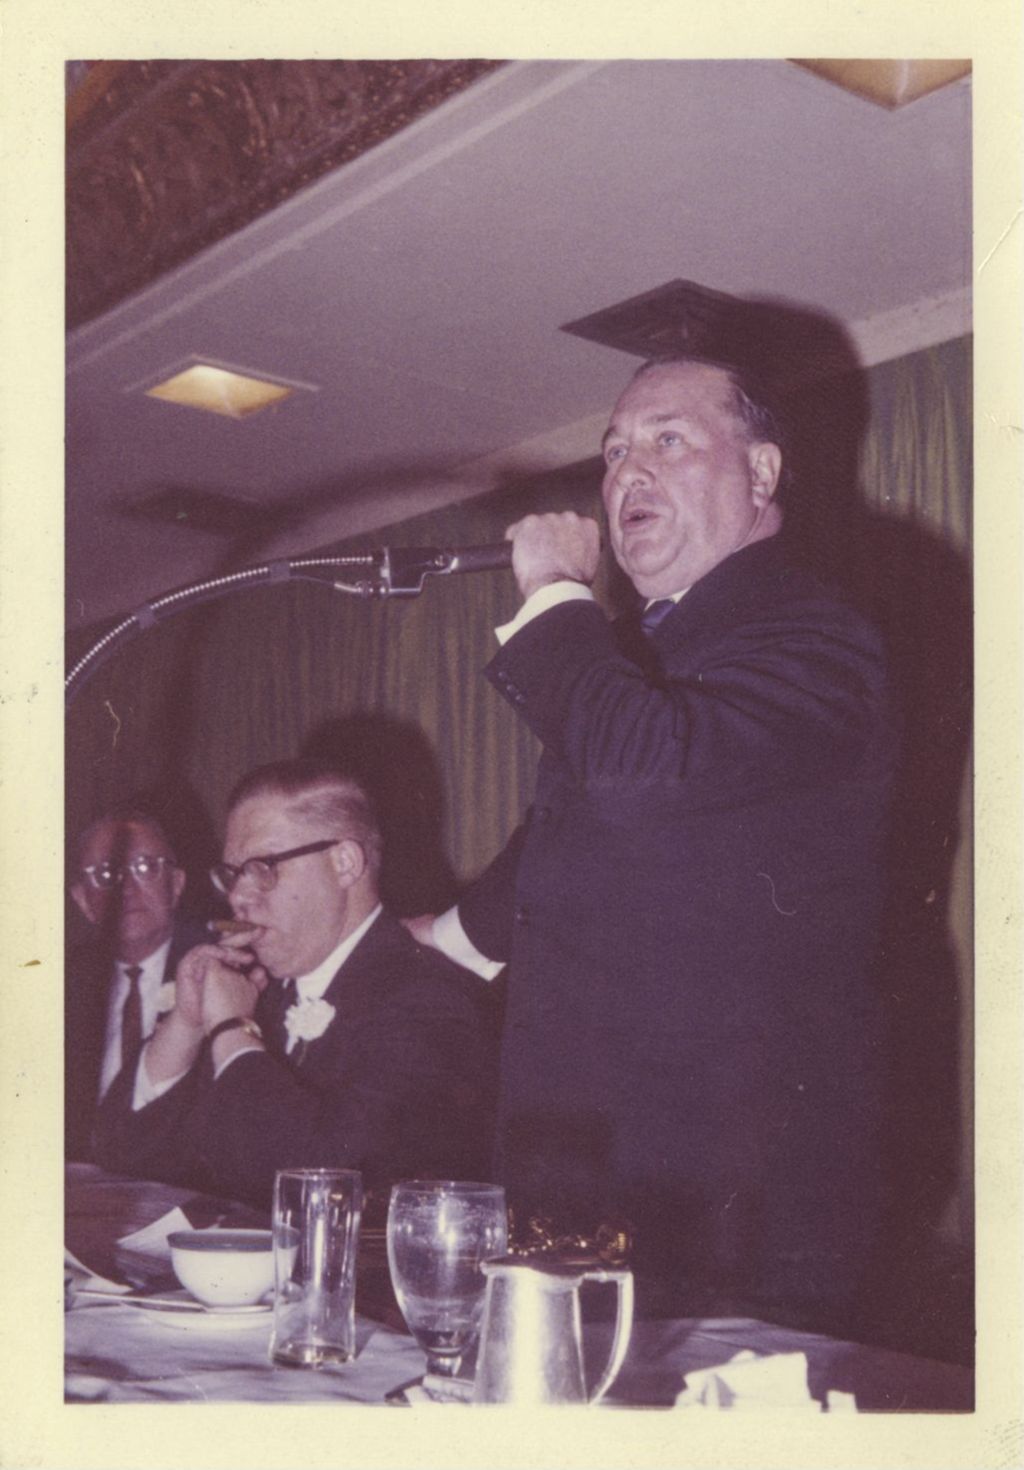 Old Timers' Baseball Association of Chicago 45th Annual dinner, Richard J. Daley speaking